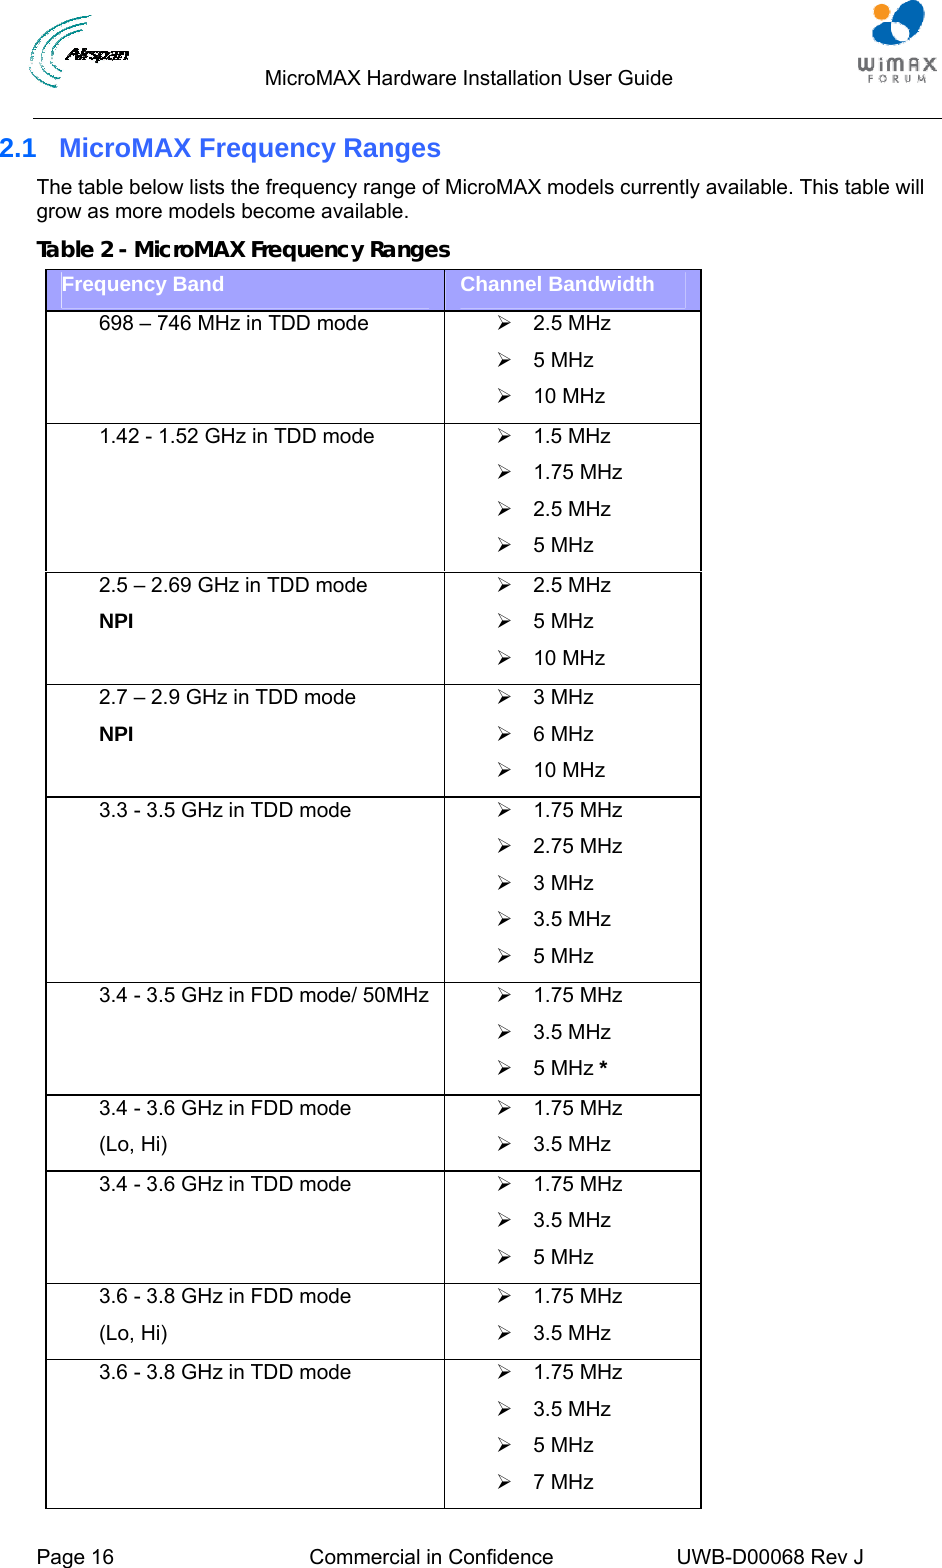                                  MicroMAX Hardware Installation User Guide     Page 16  Commercial in Confidence  UWB-D00068 Rev J   2.1  MicroMAX Frequency Ranges The table below lists the frequency range of MicroMAX models currently available. This table will grow as more models become available. Table 2 - MicroMAX Frequency Ranges Frequency Band  Channel Bandwidth 698 – 746 MHz in TDD mode  ¾ 2.5 MHz ¾ 5 MHz ¾ 10 MHz 1.42 - 1.52 GHz in TDD mode  ¾ 1.5 MHz   ¾  1.75 MHz  ¾ 2.5 MHz ¾ 5 MHz 2.5 – 2.69 GHz in TDD mode NPI ¾ 2.5 MHz ¾ 5 MHz ¾ 10 MHz 2.7 – 2.9 GHz in TDD mode NPI ¾ 3 MHz ¾ 6 MHz ¾ 10 MHz 3.3 - 3.5 GHz in TDD mode  ¾  1.75 MHz  ¾ 2.75 MHz ¾ 3 MHz ¾ 3.5 MHz ¾ 5 MHz 3.4 - 3.5 GHz in FDD mode/ 50MHz  ¾ 1.75 MHz ¾ 3.5 MHz ¾ 5 MHz * 3.4 - 3.6 GHz in FDD mode (Lo, Hi) ¾ 1.75 MHz ¾ 3.5 MHz 3.4 - 3.6 GHz in TDD mode  ¾ 1.75 MHz ¾ 3.5 MHz ¾ 5 MHz 3.6 - 3.8 GHz in FDD mode (Lo, Hi) ¾ 1.75 MHz ¾ 3.5 MHz 3.6 - 3.8 GHz in TDD mode  ¾ 1.75 MHz ¾ 3.5 MHz ¾ 5 MHz ¾ 7 MHz 